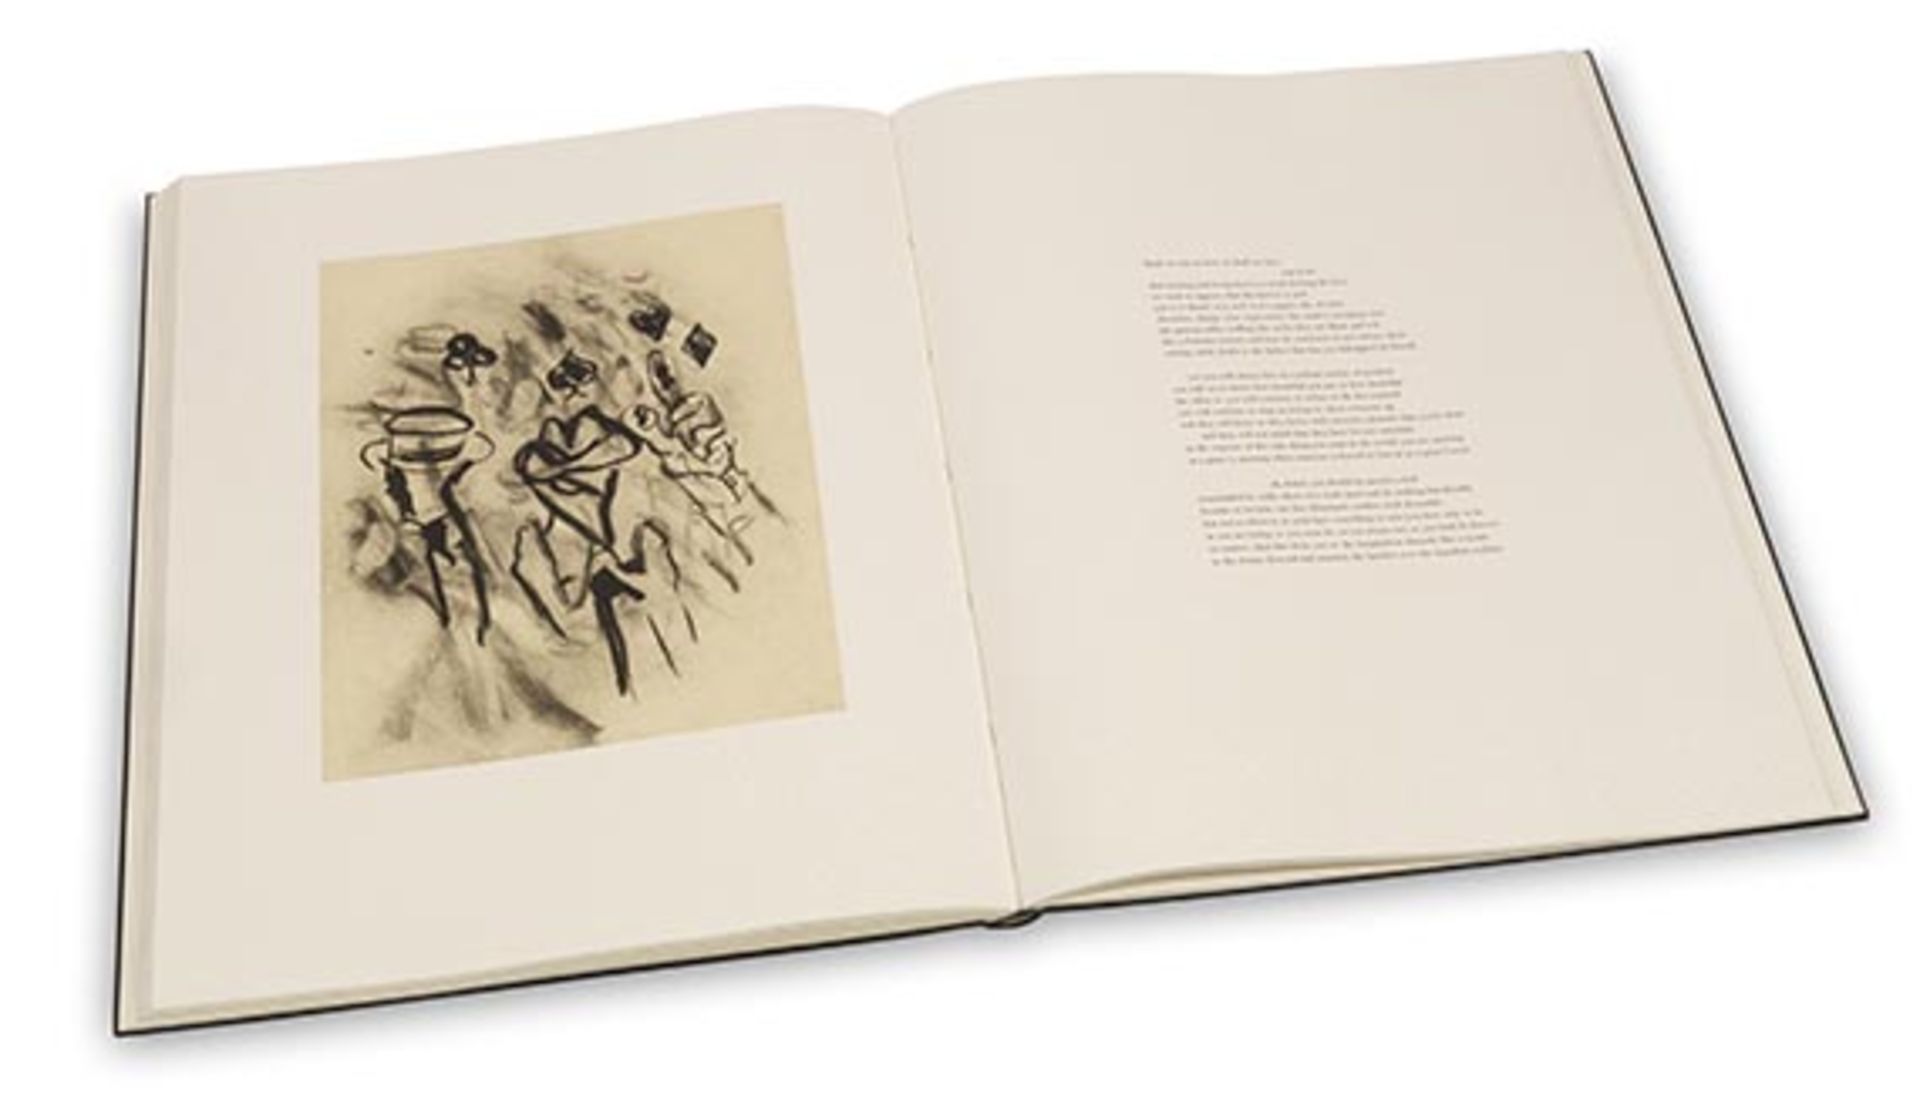 Frank O'Hara Poems. With Lithographs by Willem de Kooning. New York, Limited Editions Club 1988. 1